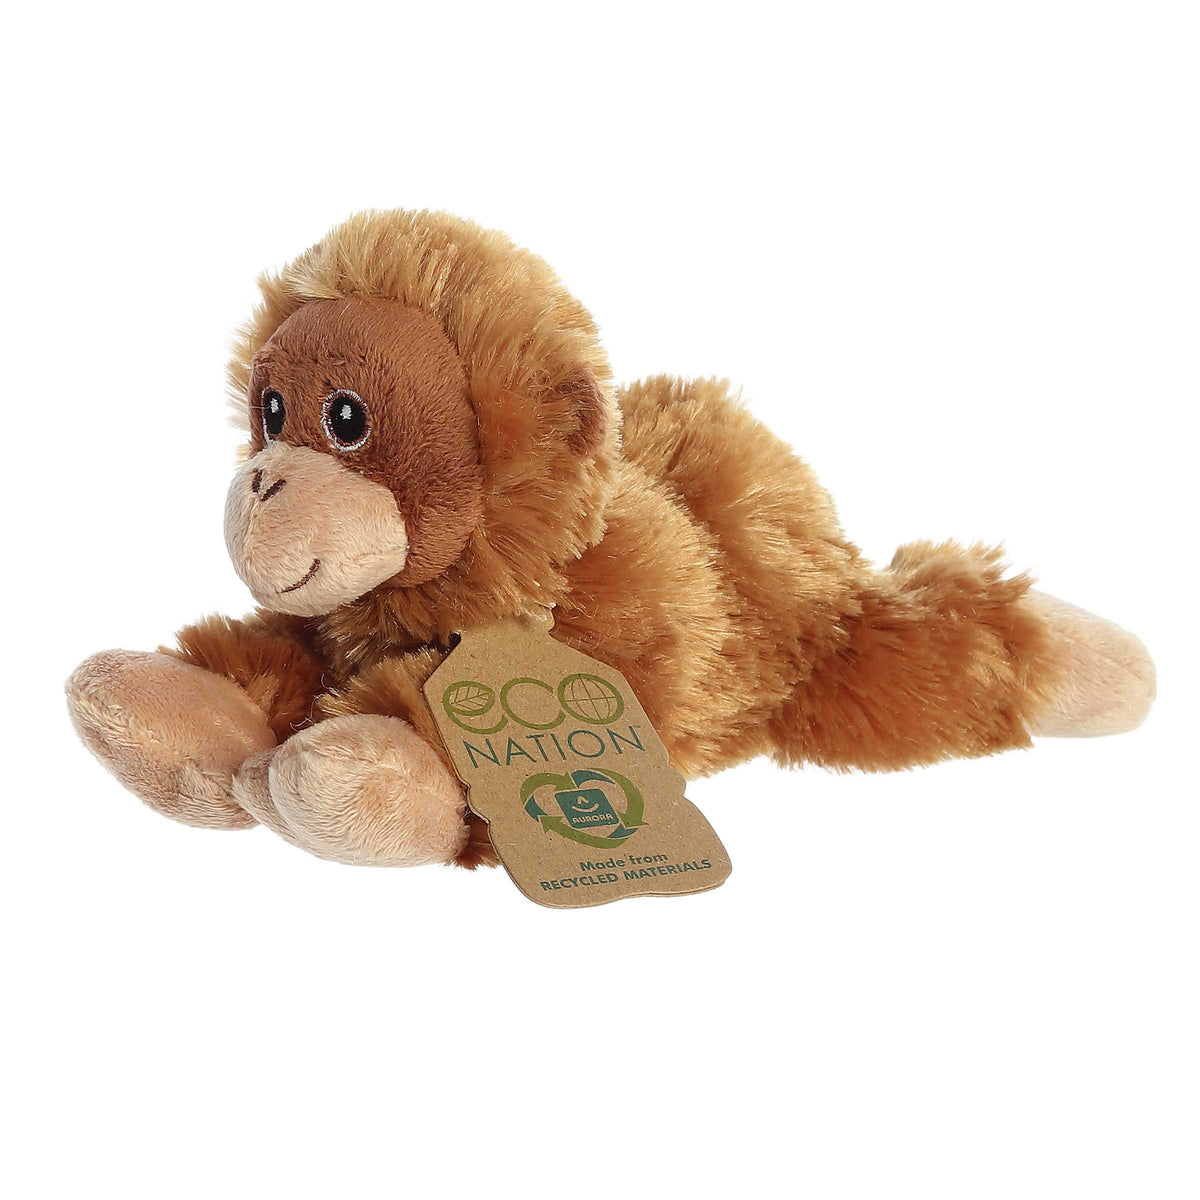 Eco Softie Orangutan Plush, showcasing deep orange fur and a gentle gaze, made from recycled materials with 'Eco Nation' tag.